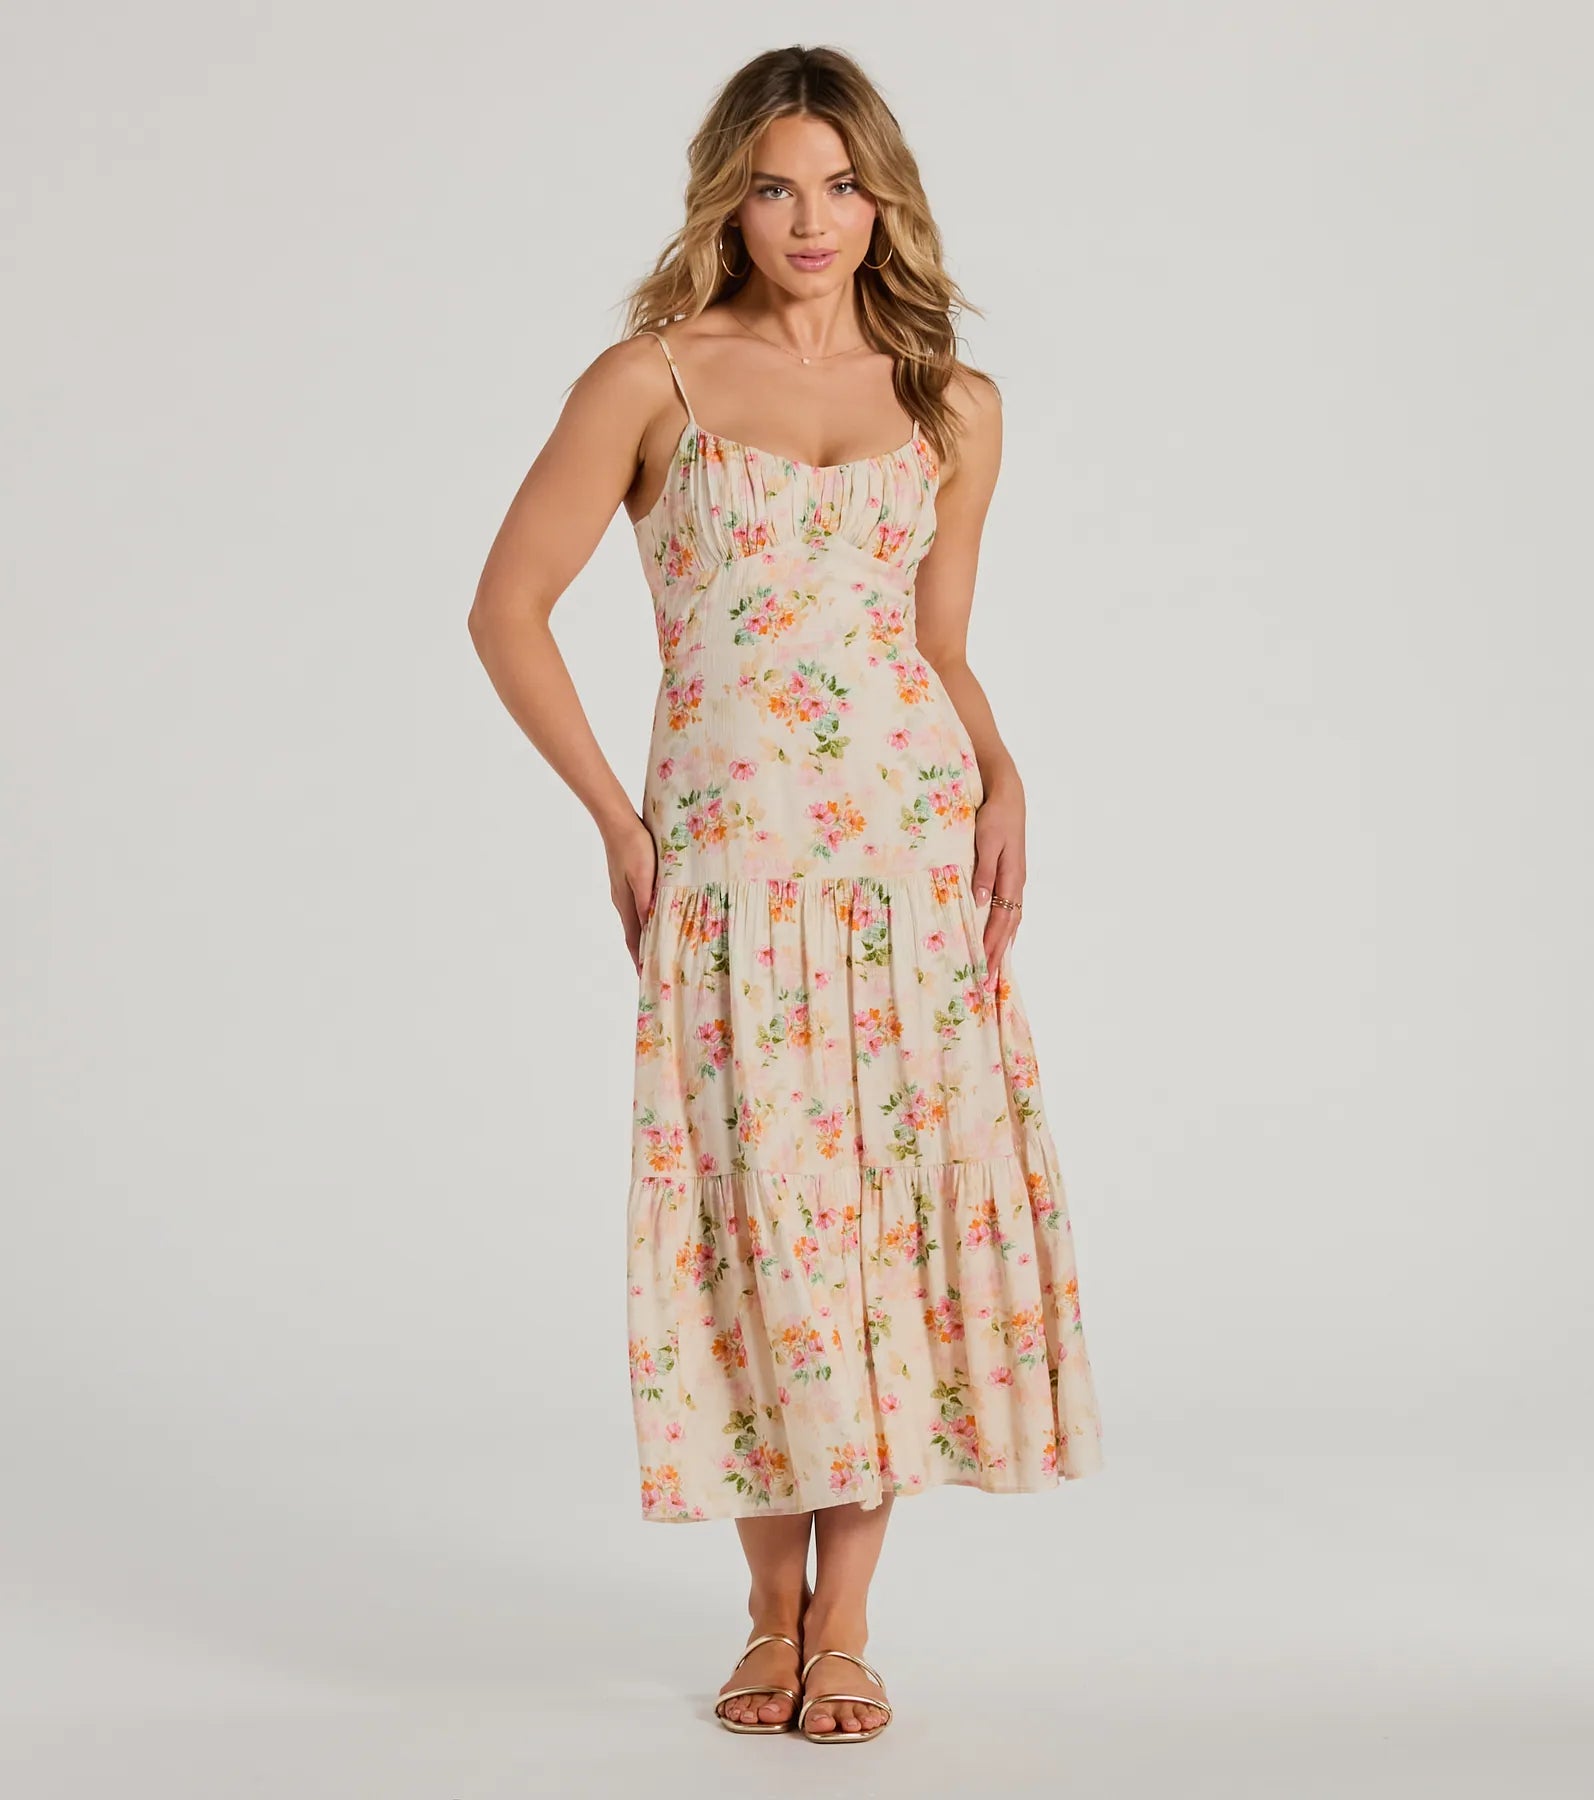 Cocktail Chiffon Lace-Up Flowy Back Zipper Spaghetti Strap Scoop Neck Floral Print Midi Dress With Ruffles